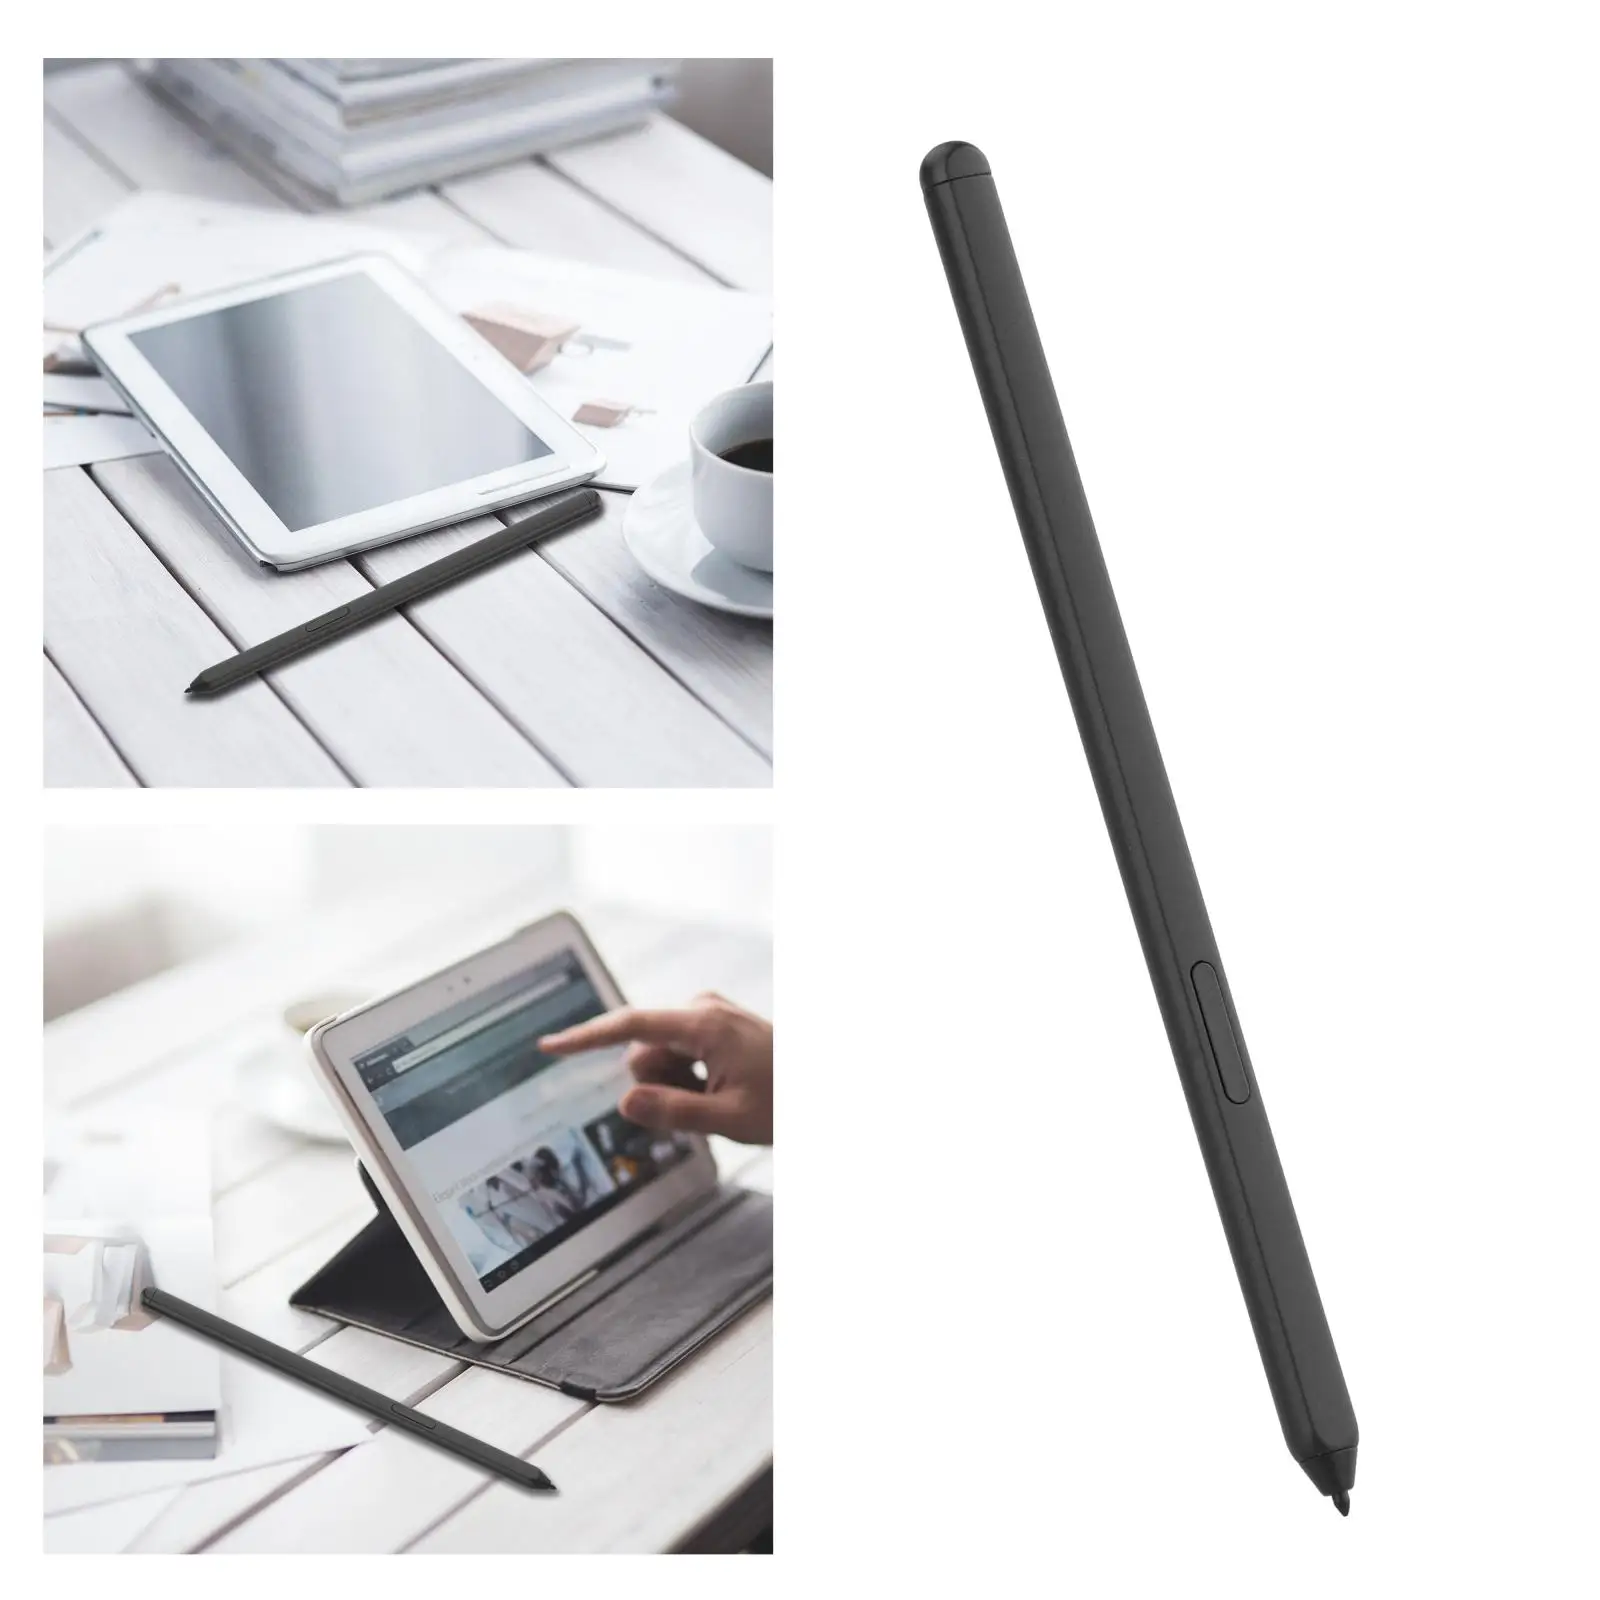 Stylus Electromagnetic Pen Suitable for S21 Mobile Phone Screen Stylus Soft Head Natural Grip for Writing Drawing